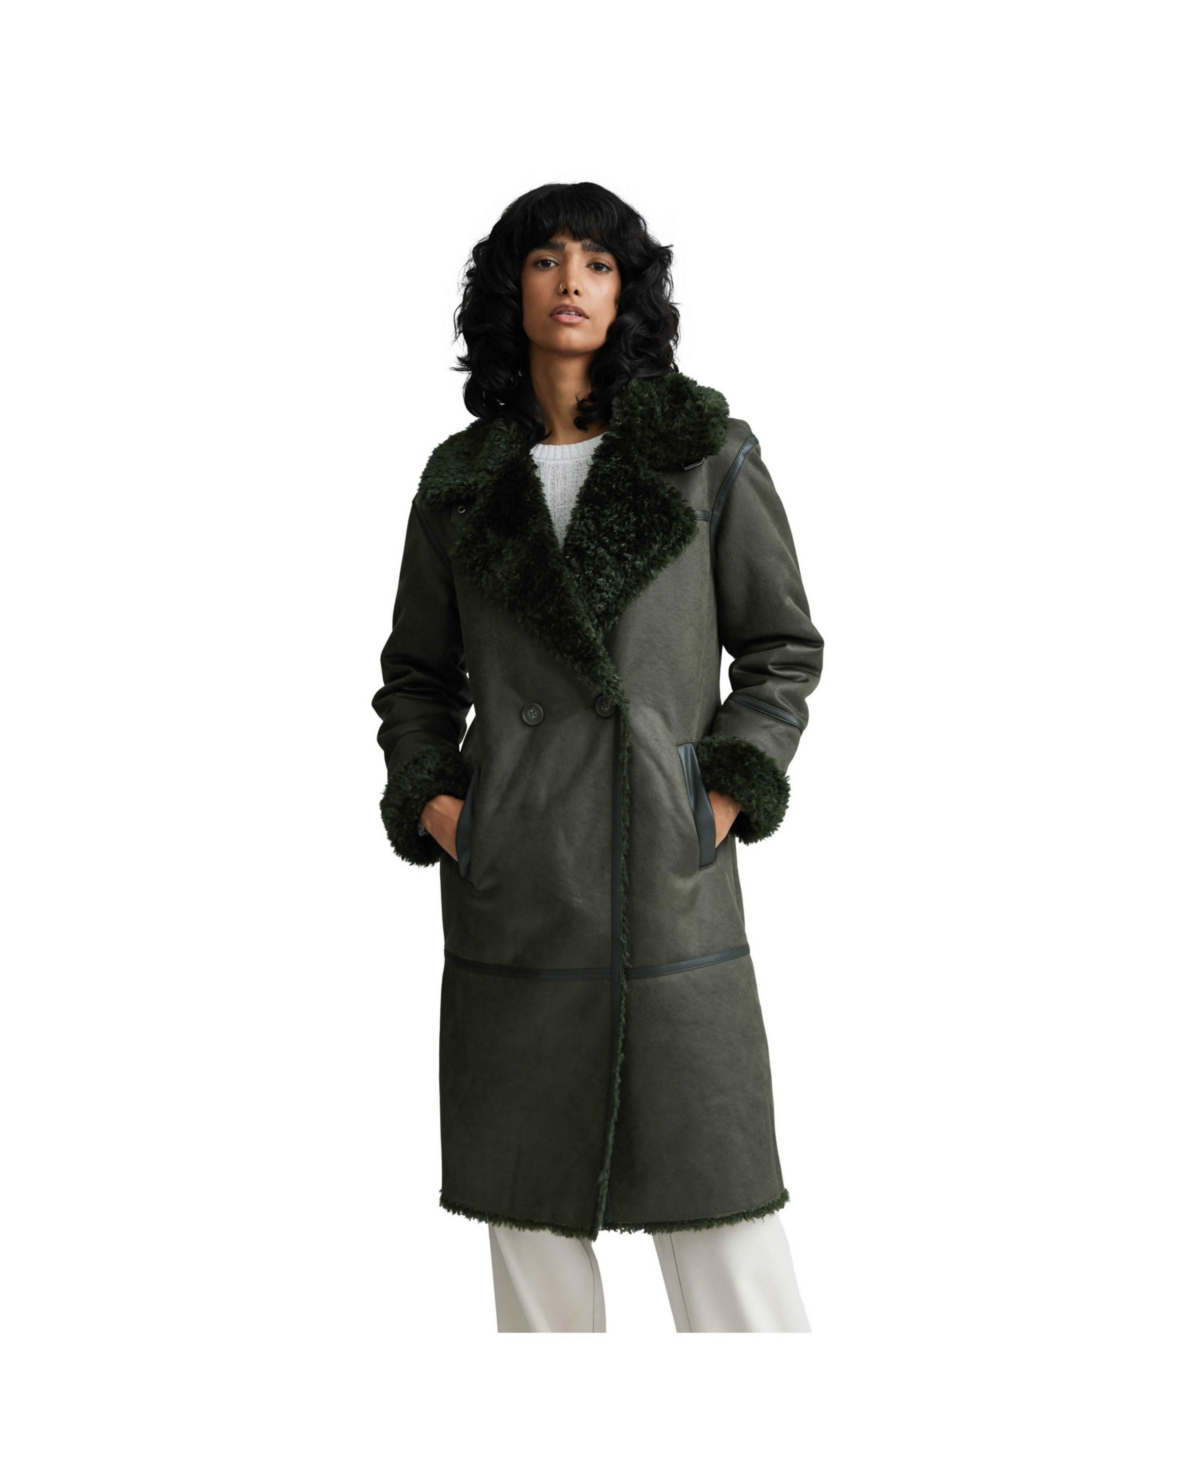 Women's Shearling Double Breasted Long Coat - Olive